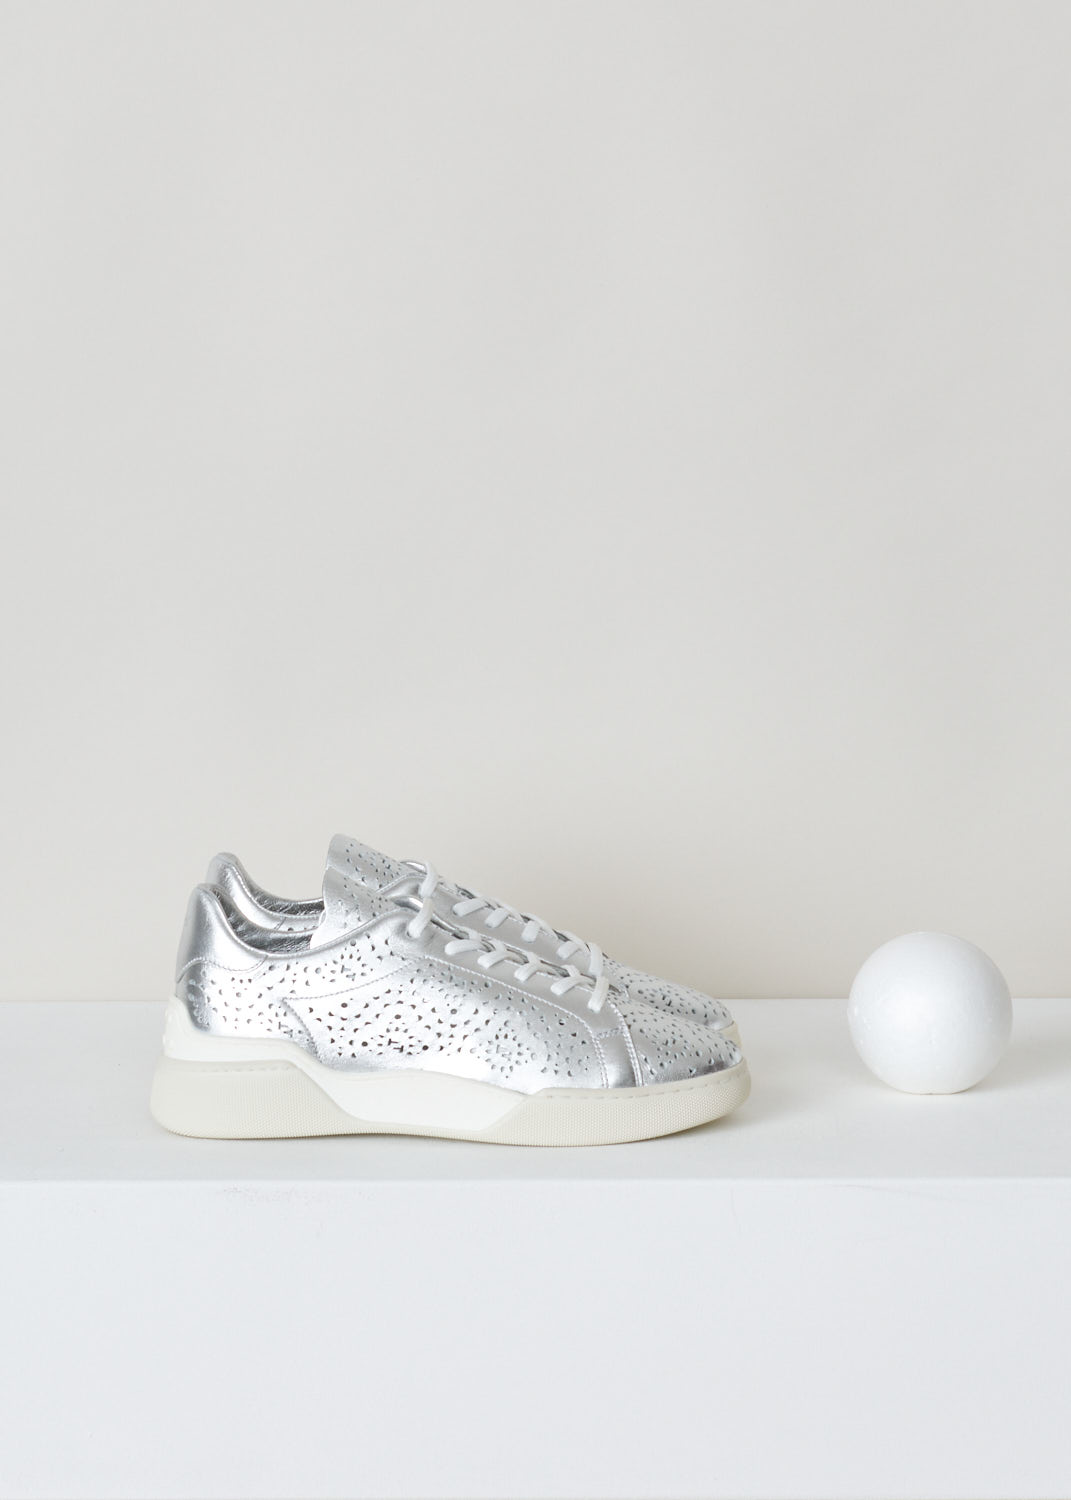 Tods, Silver coloured laser-cut sneakers, XXW31C0CU10MTZB200_argento, silver, side. Silver coloured sneakers, tooled with a laser to get all these lovely shapes cut out. All leather on the inside with a rubber sole. 